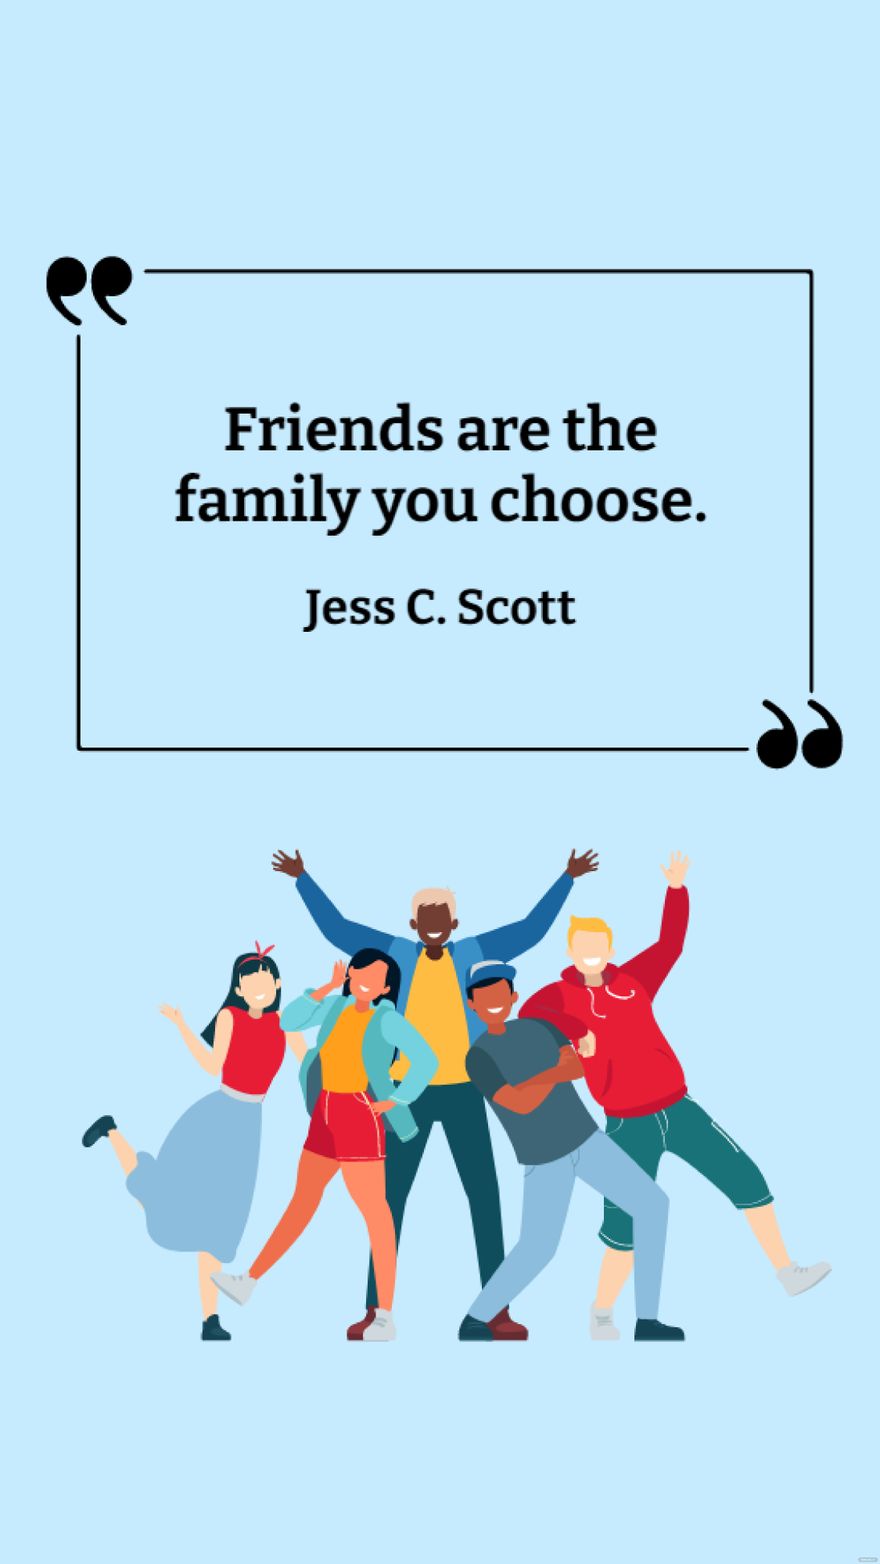 Jess C. Scott - Friends are the family you choose.